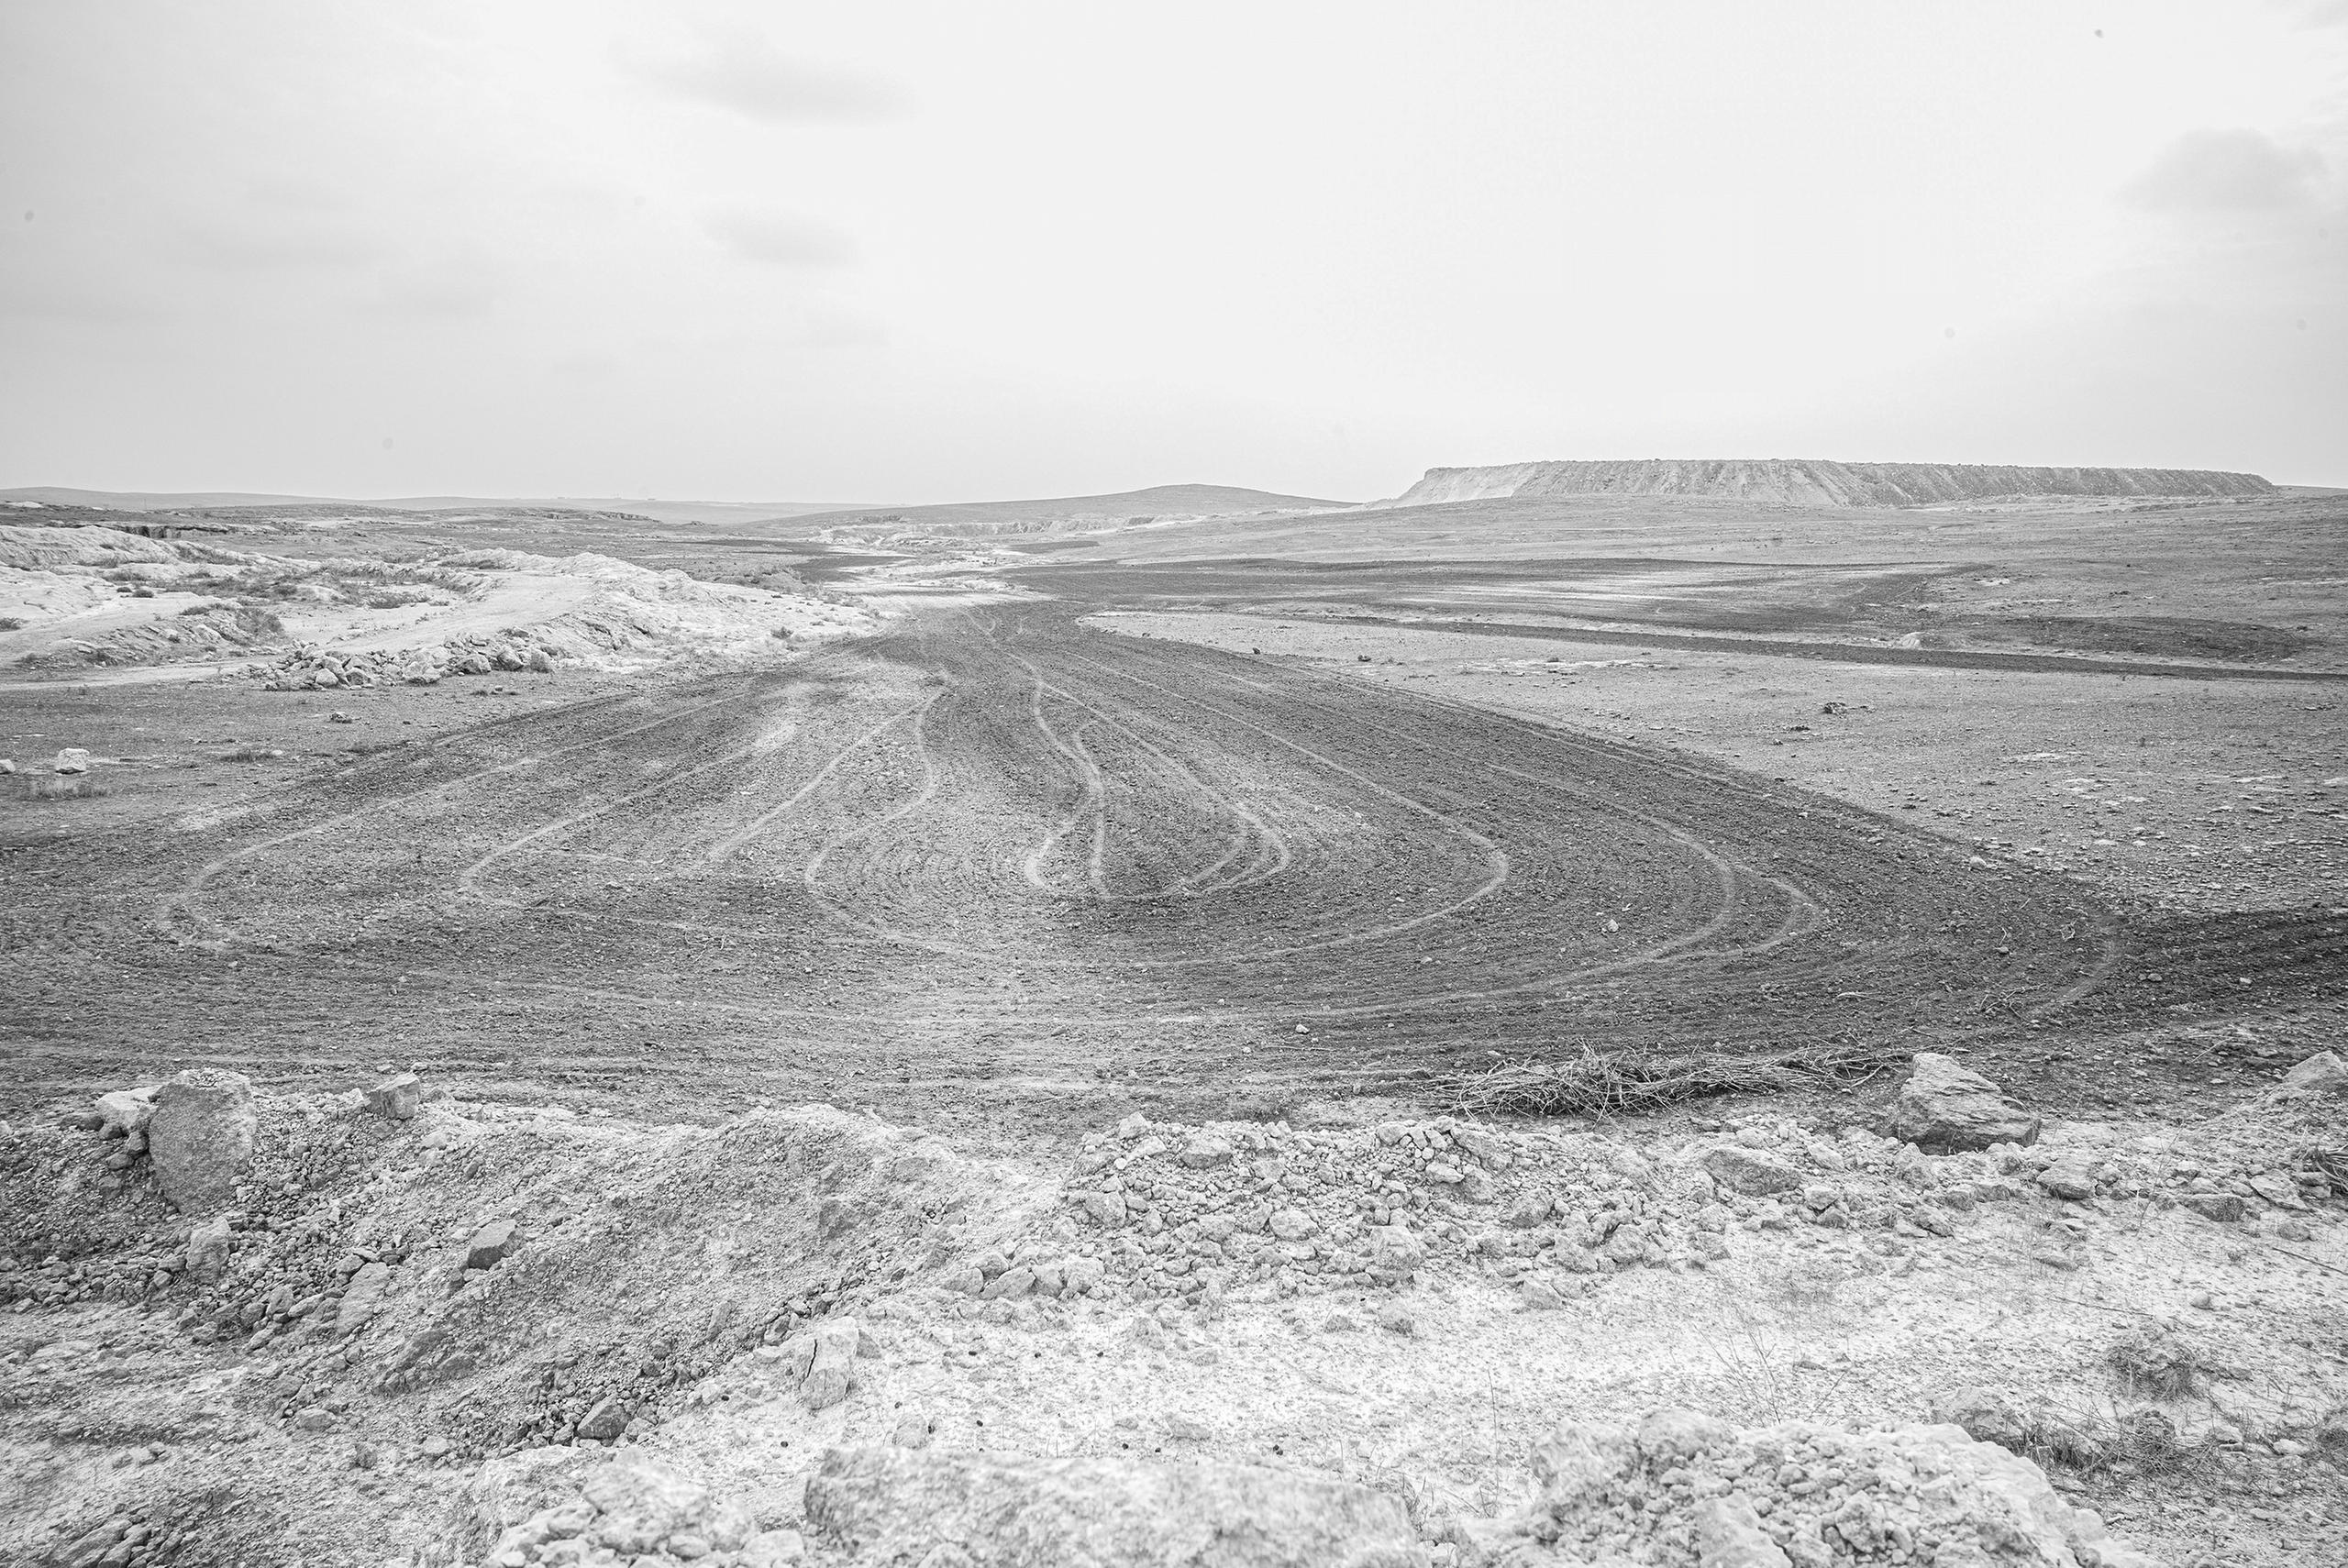 Black and white photograph of the desert between Syria and Turkey